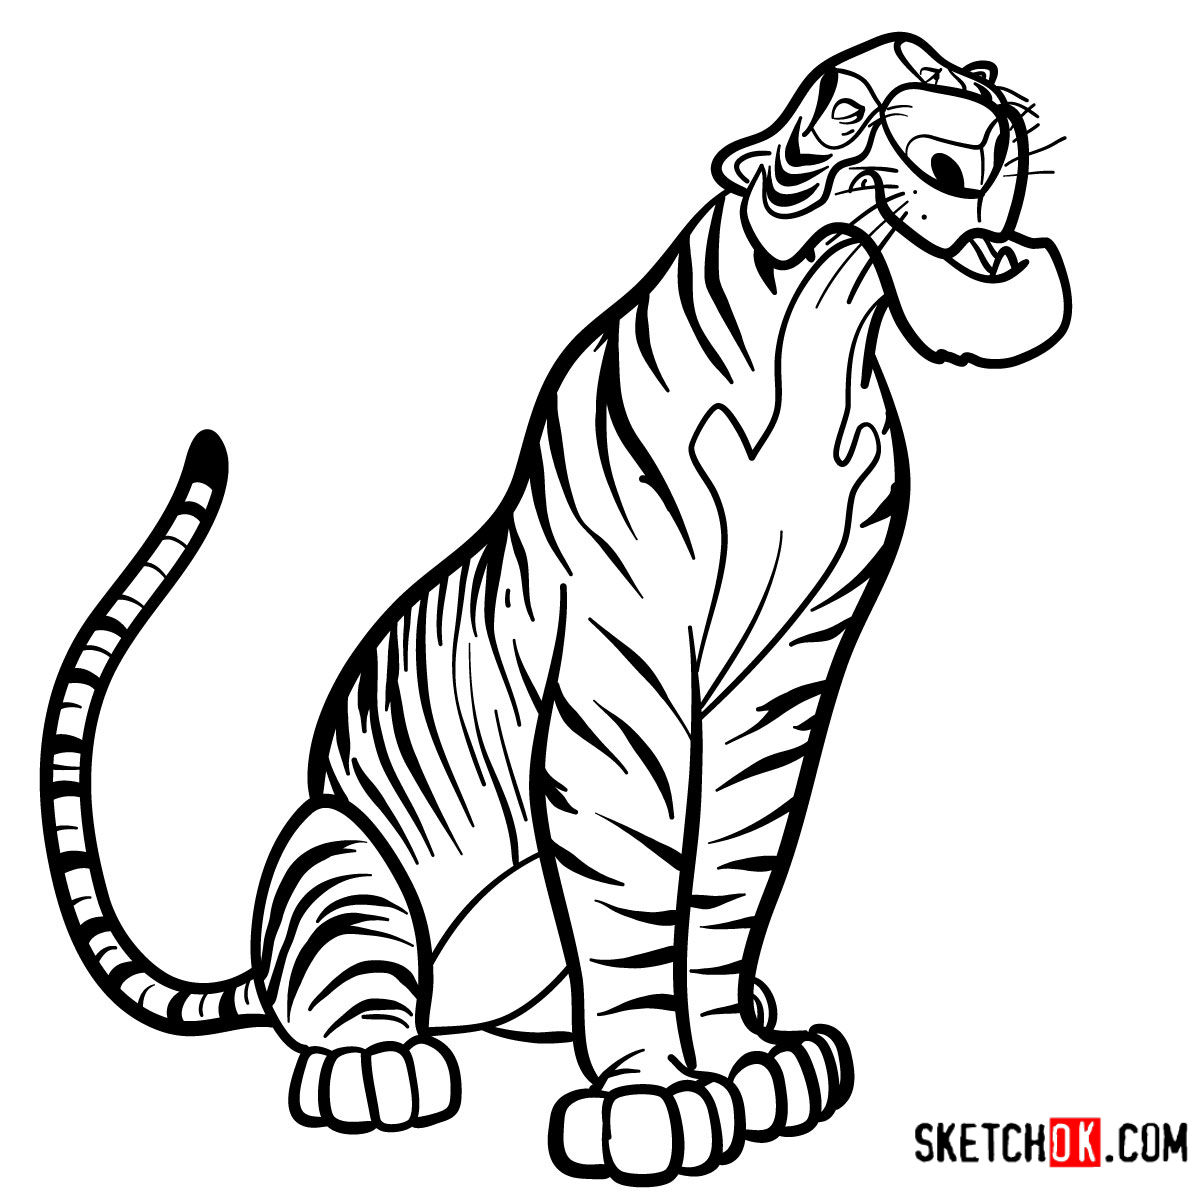 How to draw Shere Khan | The Jungle Book - step 14